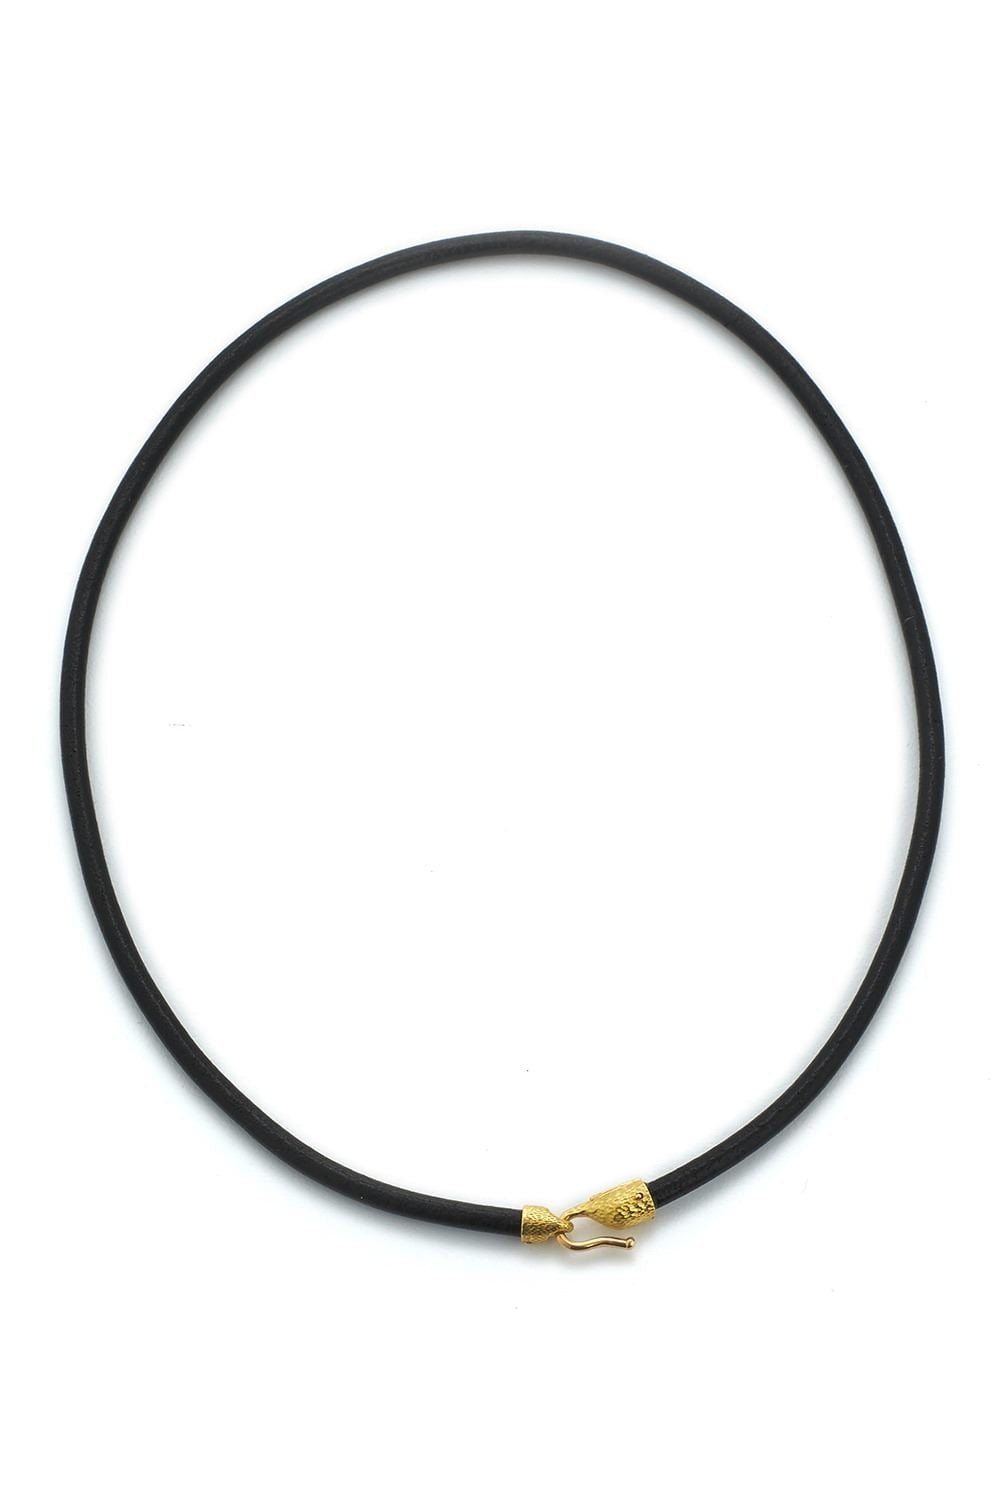 DAVID WEBB-Black Leather Chord Necklace-YELLOW GOLD